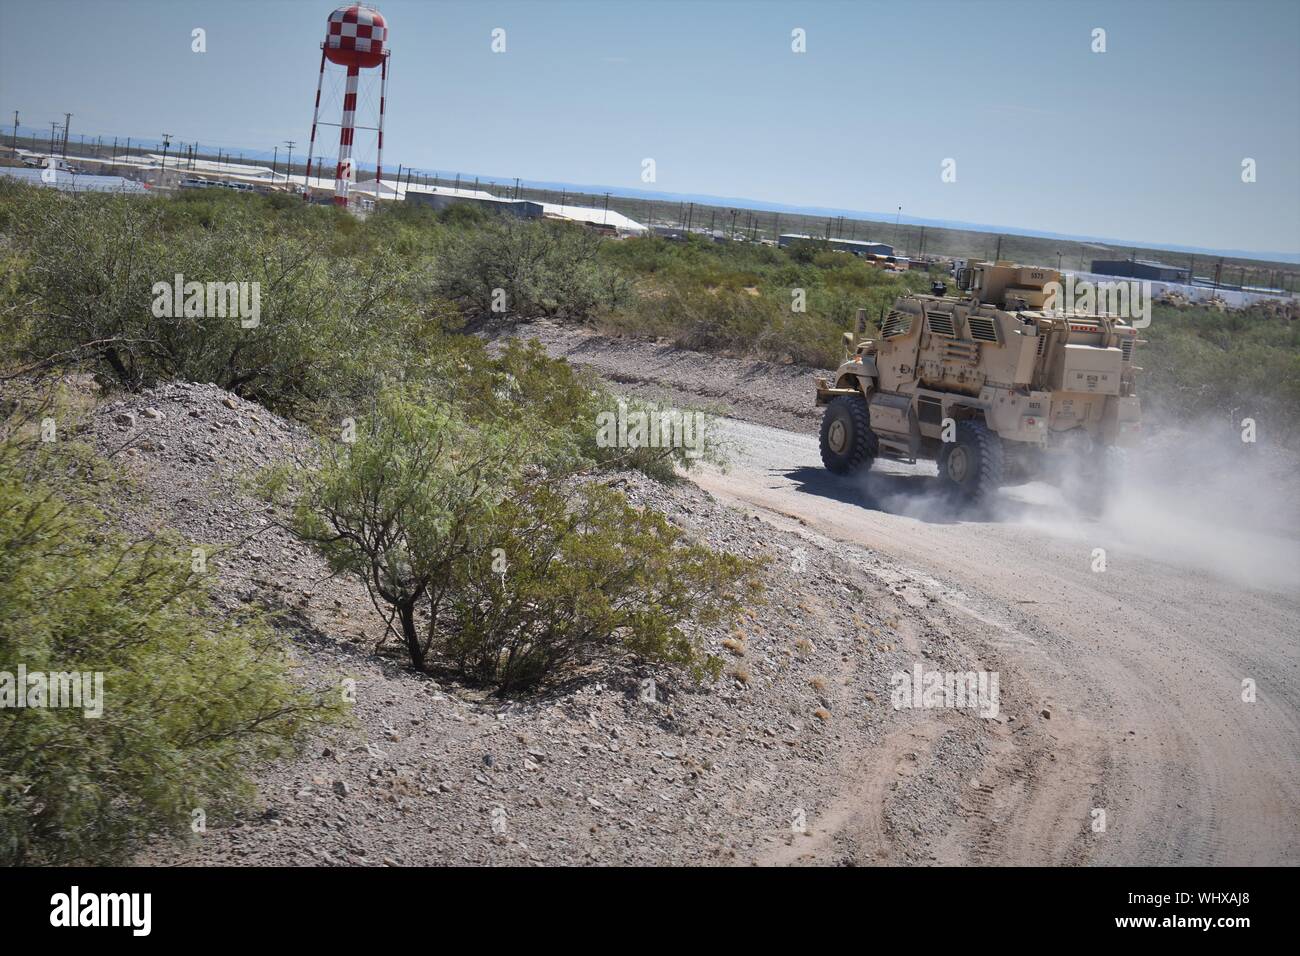 U.S. Soldiers in Bravo Company, 1-252 Armor Regiment, 30th Armored Brigade Combat Team, North Carolina National Guard, drive the MaxxPro Mine Resistance Ambush Protected (MRAP) and Joint Light Tactical Vehicle (JLTV) while conducting mobilization training in the vicinity of Fort Bliss, Texas, August 31, 2019.  The 30th ABCT is preparing to mobilize to support Operation Spartan Shield and is comprised of Soldiers from the North Carolina, South Carolina, West Virgina and Ohio National Guard. (U.S. Army National Guard photo by Lt. Col. Cindi King) Stock Photo